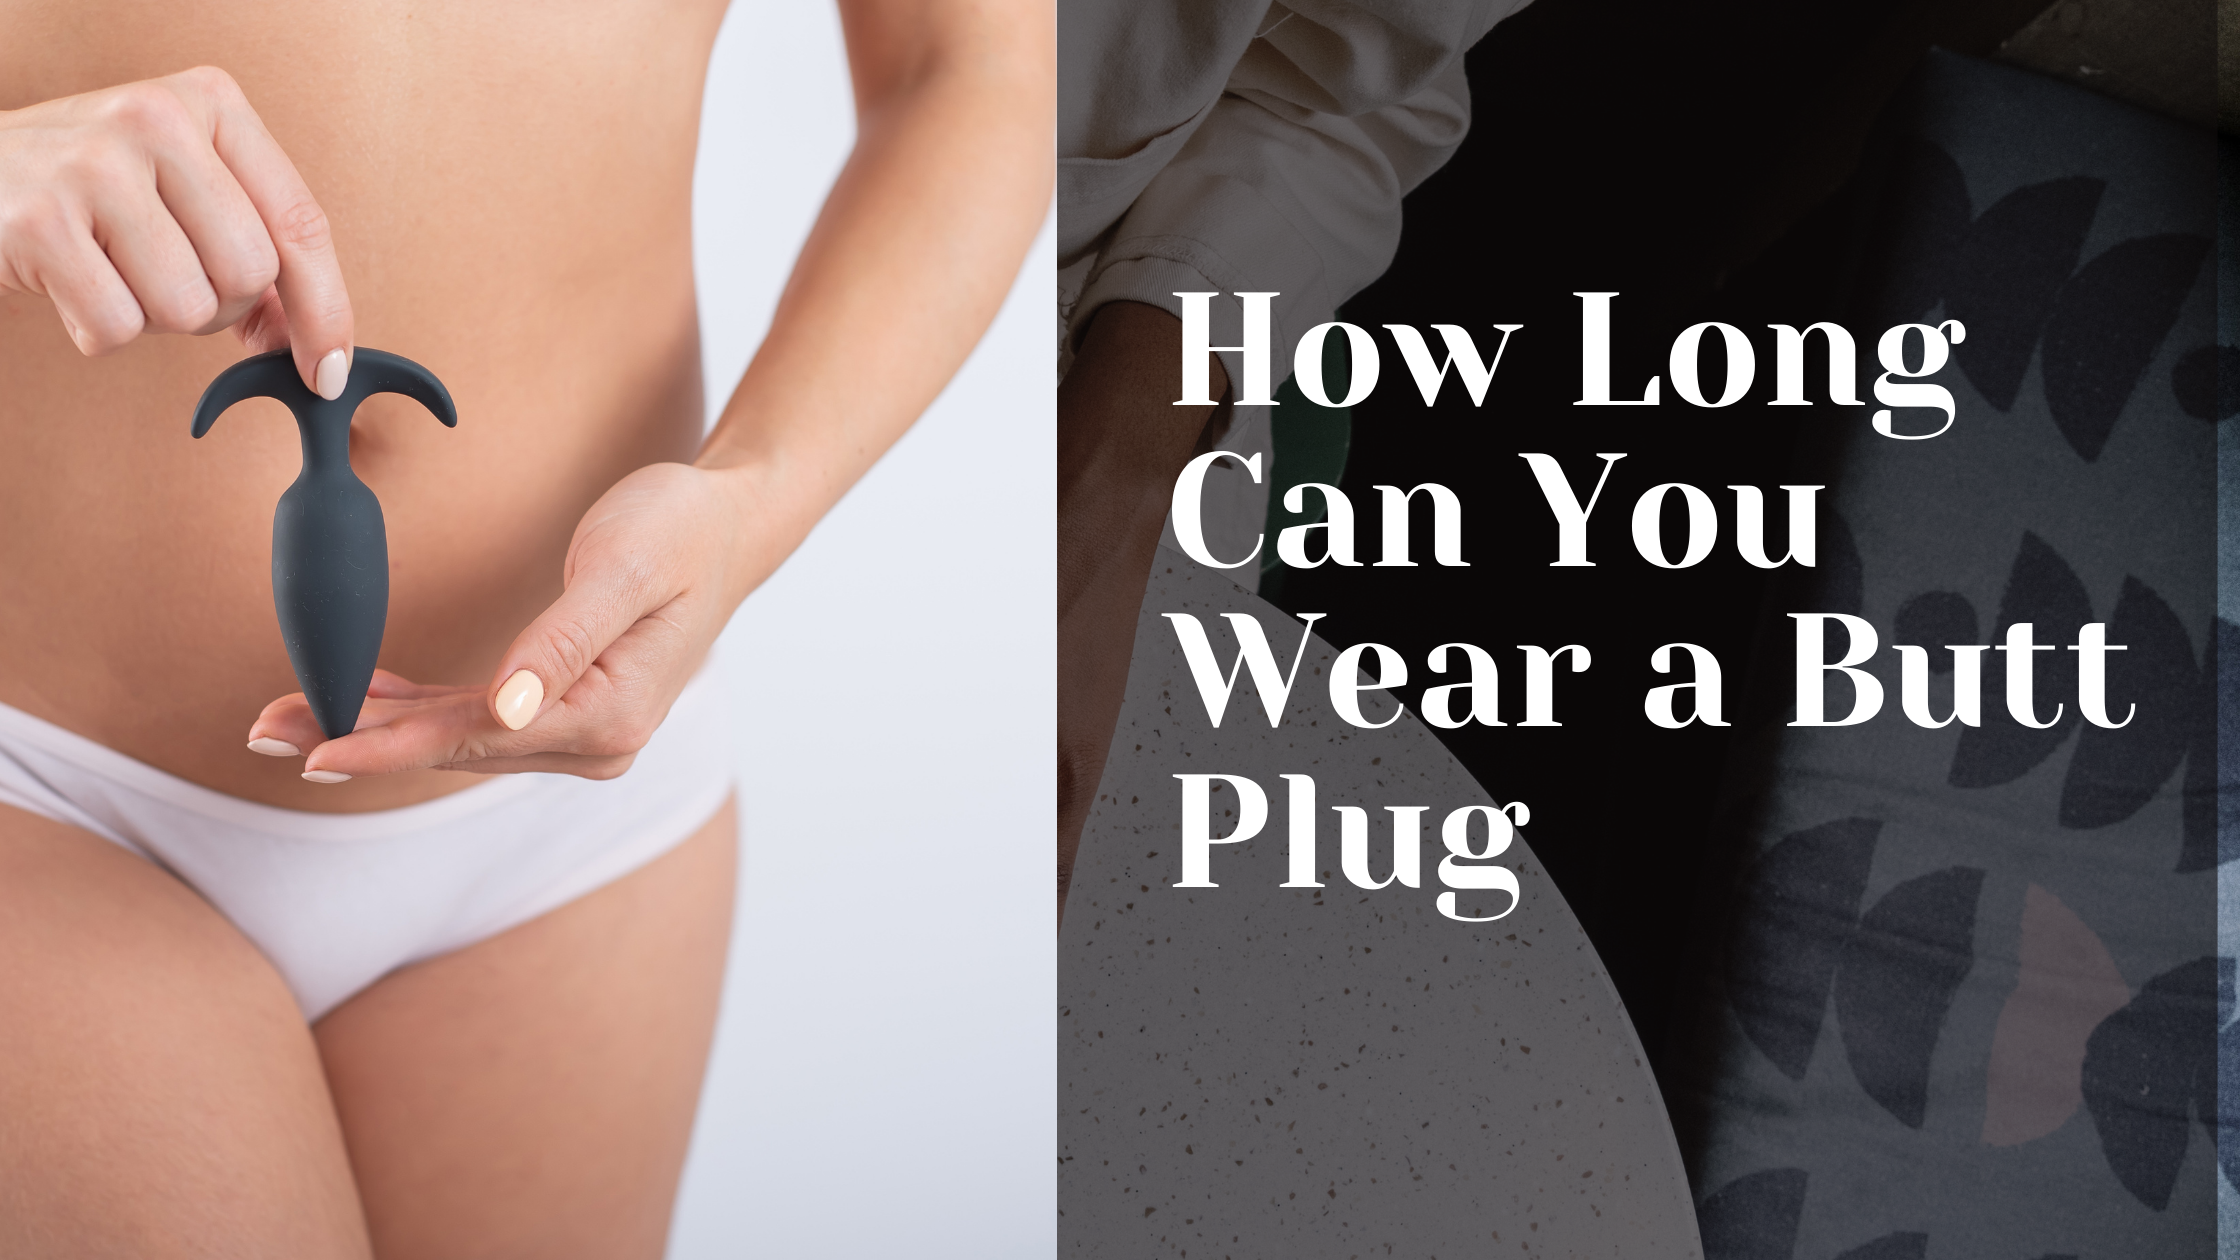 How Long Can You Wear a Butt Plug